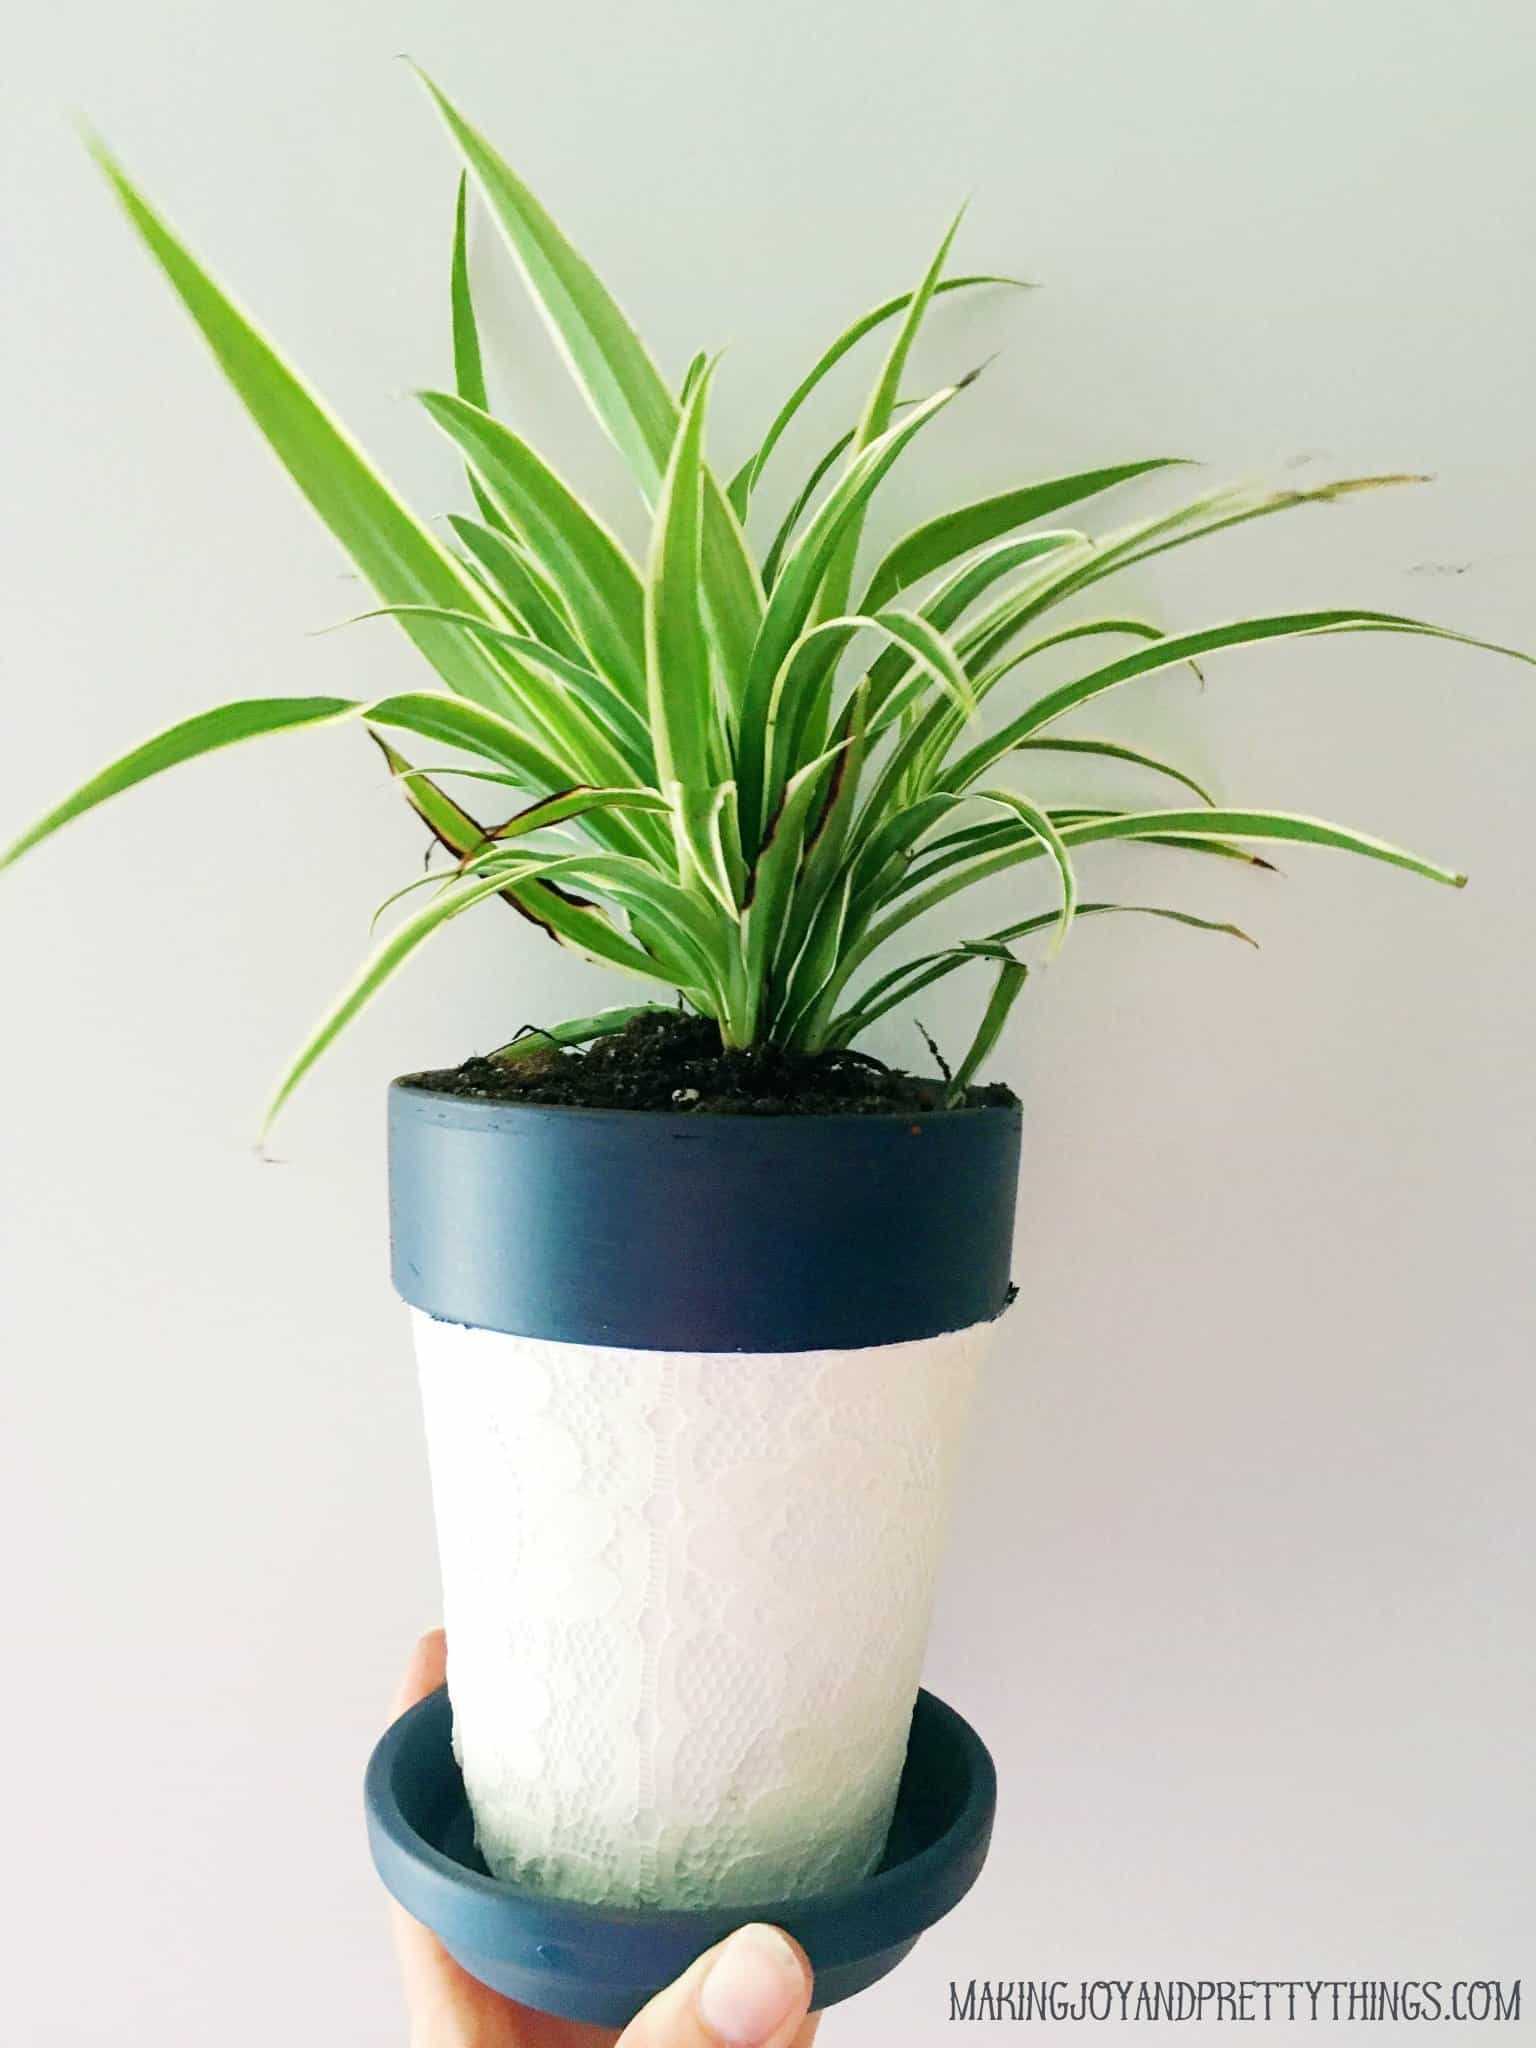 A woman's hand holds a small lace-covered potted dracaena plant. The pot is painted a deep navy blue and white, with white lace covering the body of the pot.